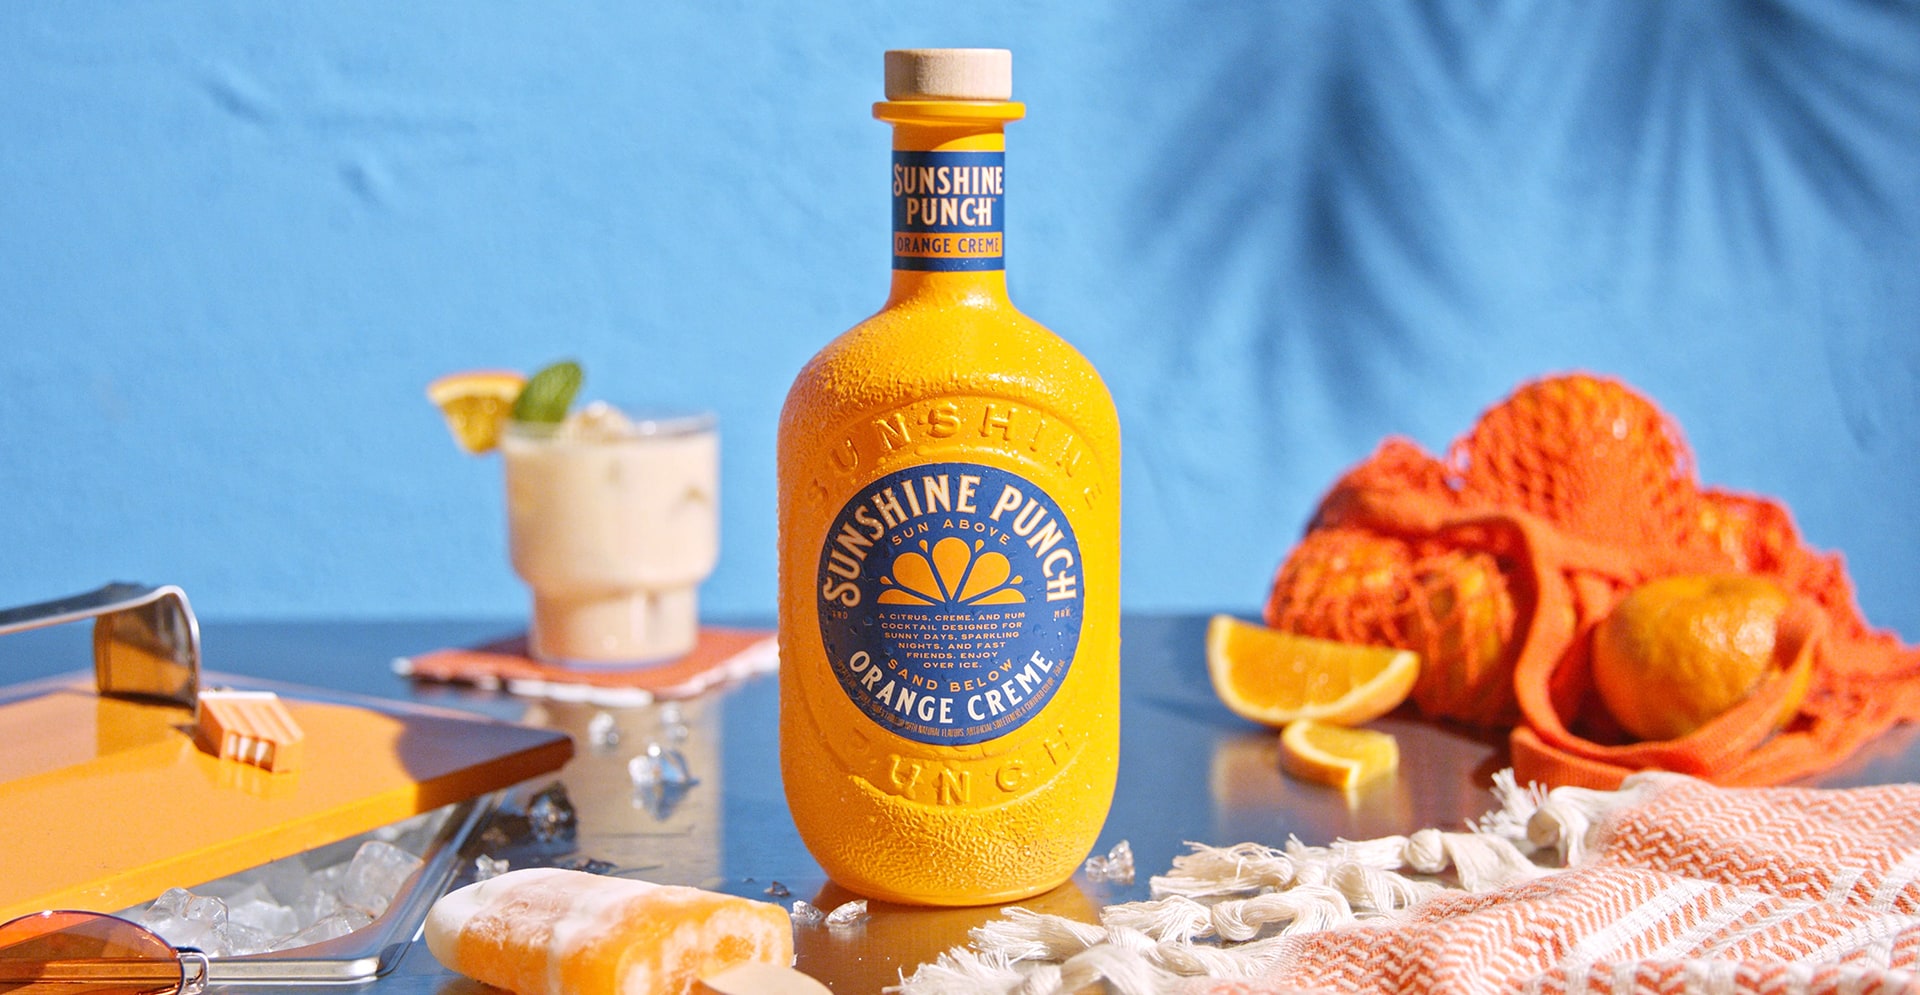 Bottle of Sunshine Punch Orange Creme ready-to-pour cocktail